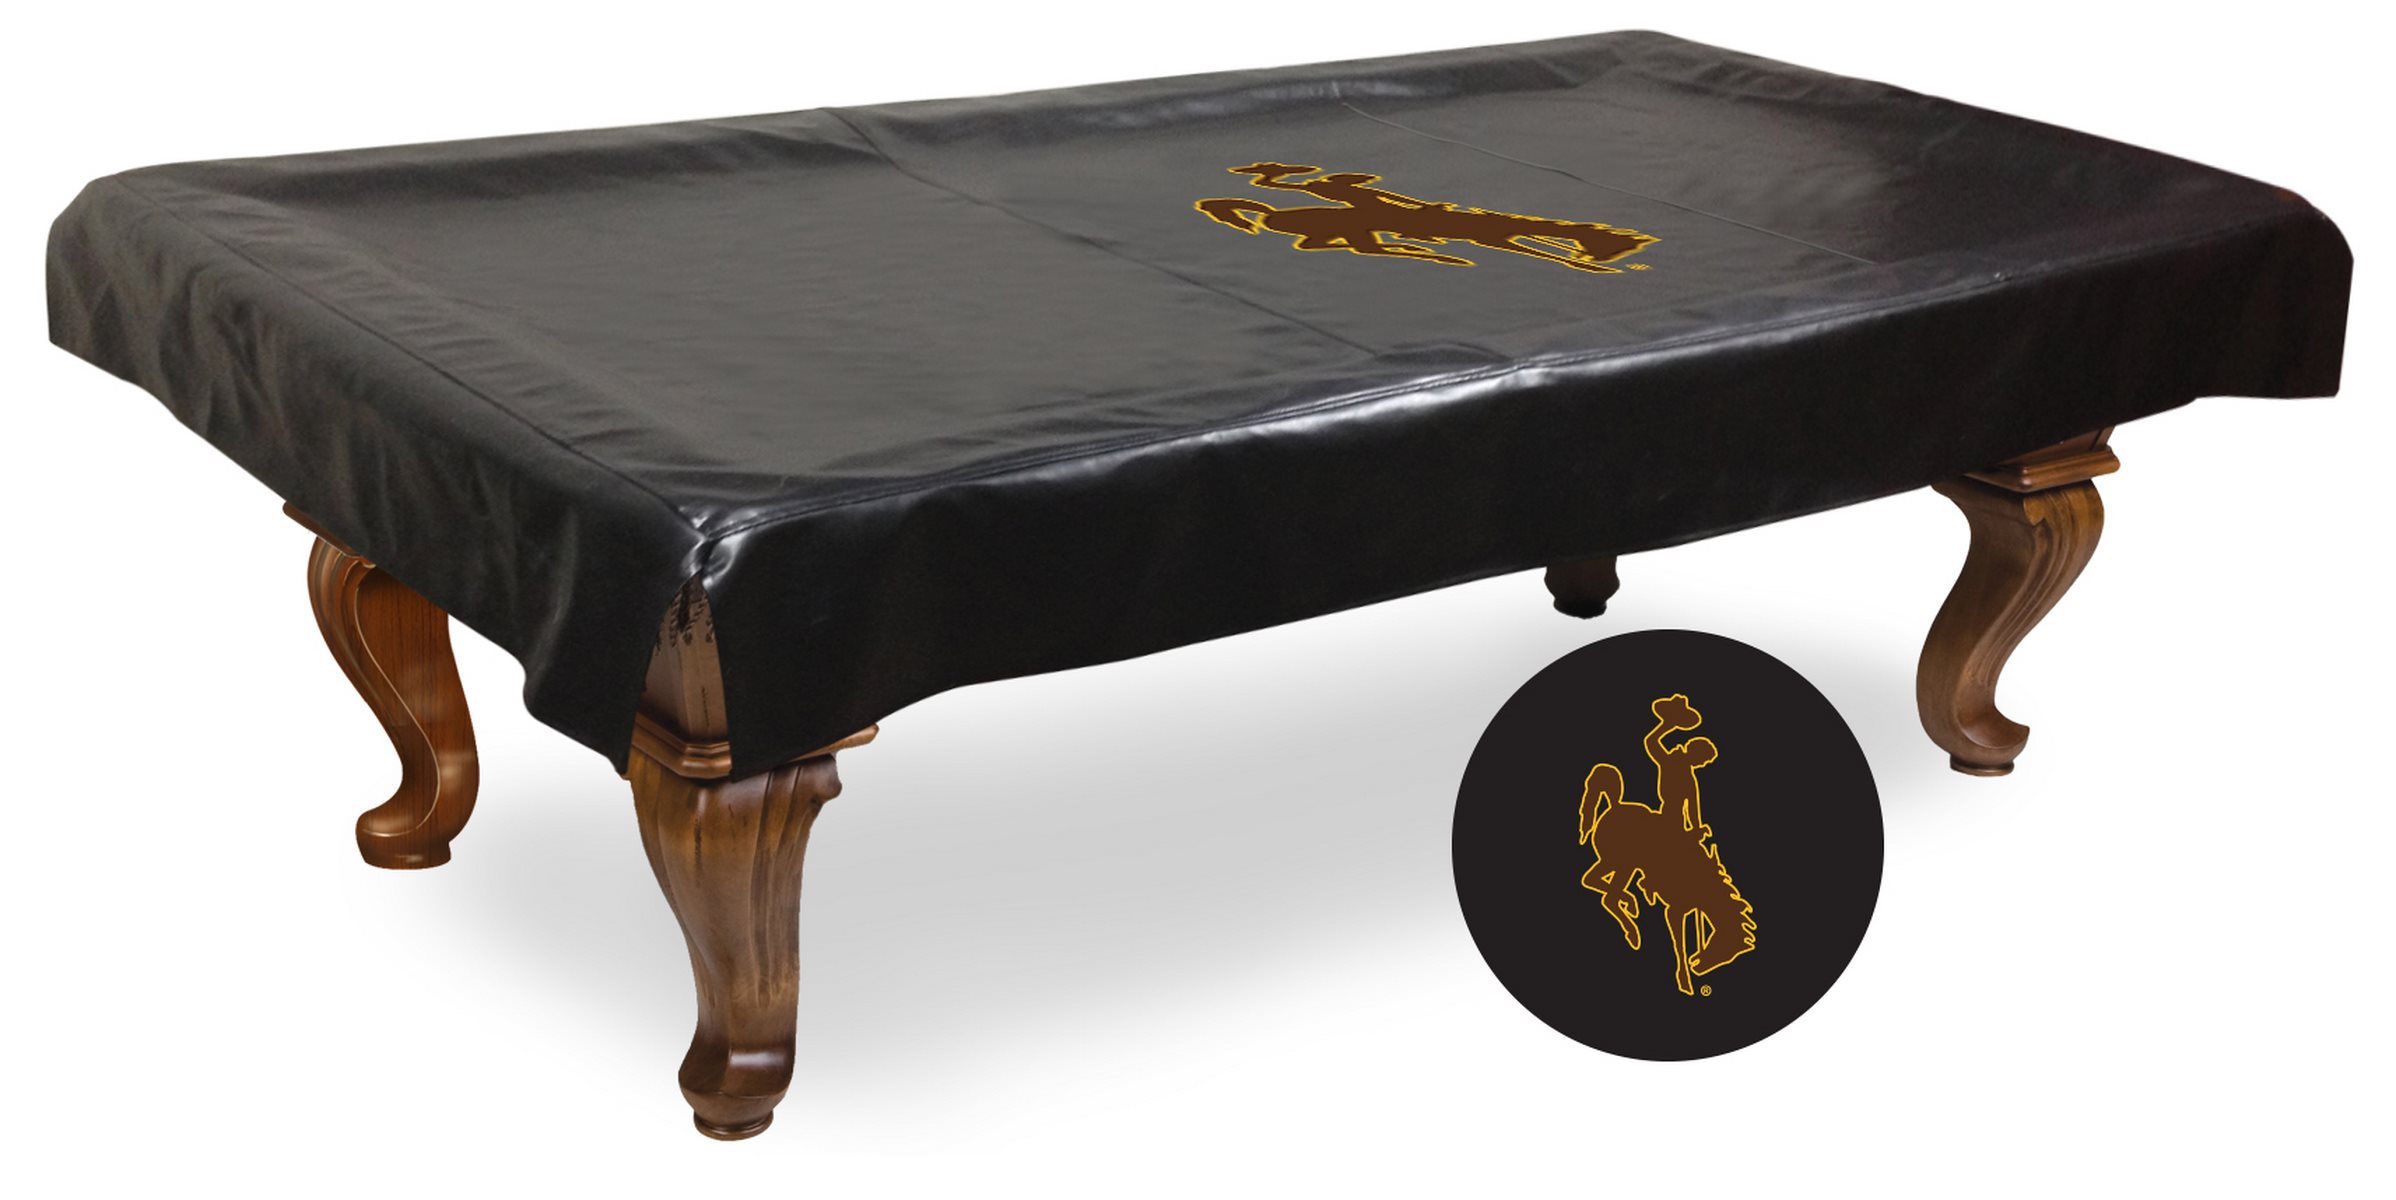 Picture of Holland Bar Stool BCV9Wymng Wyoming Billiard Table Cover